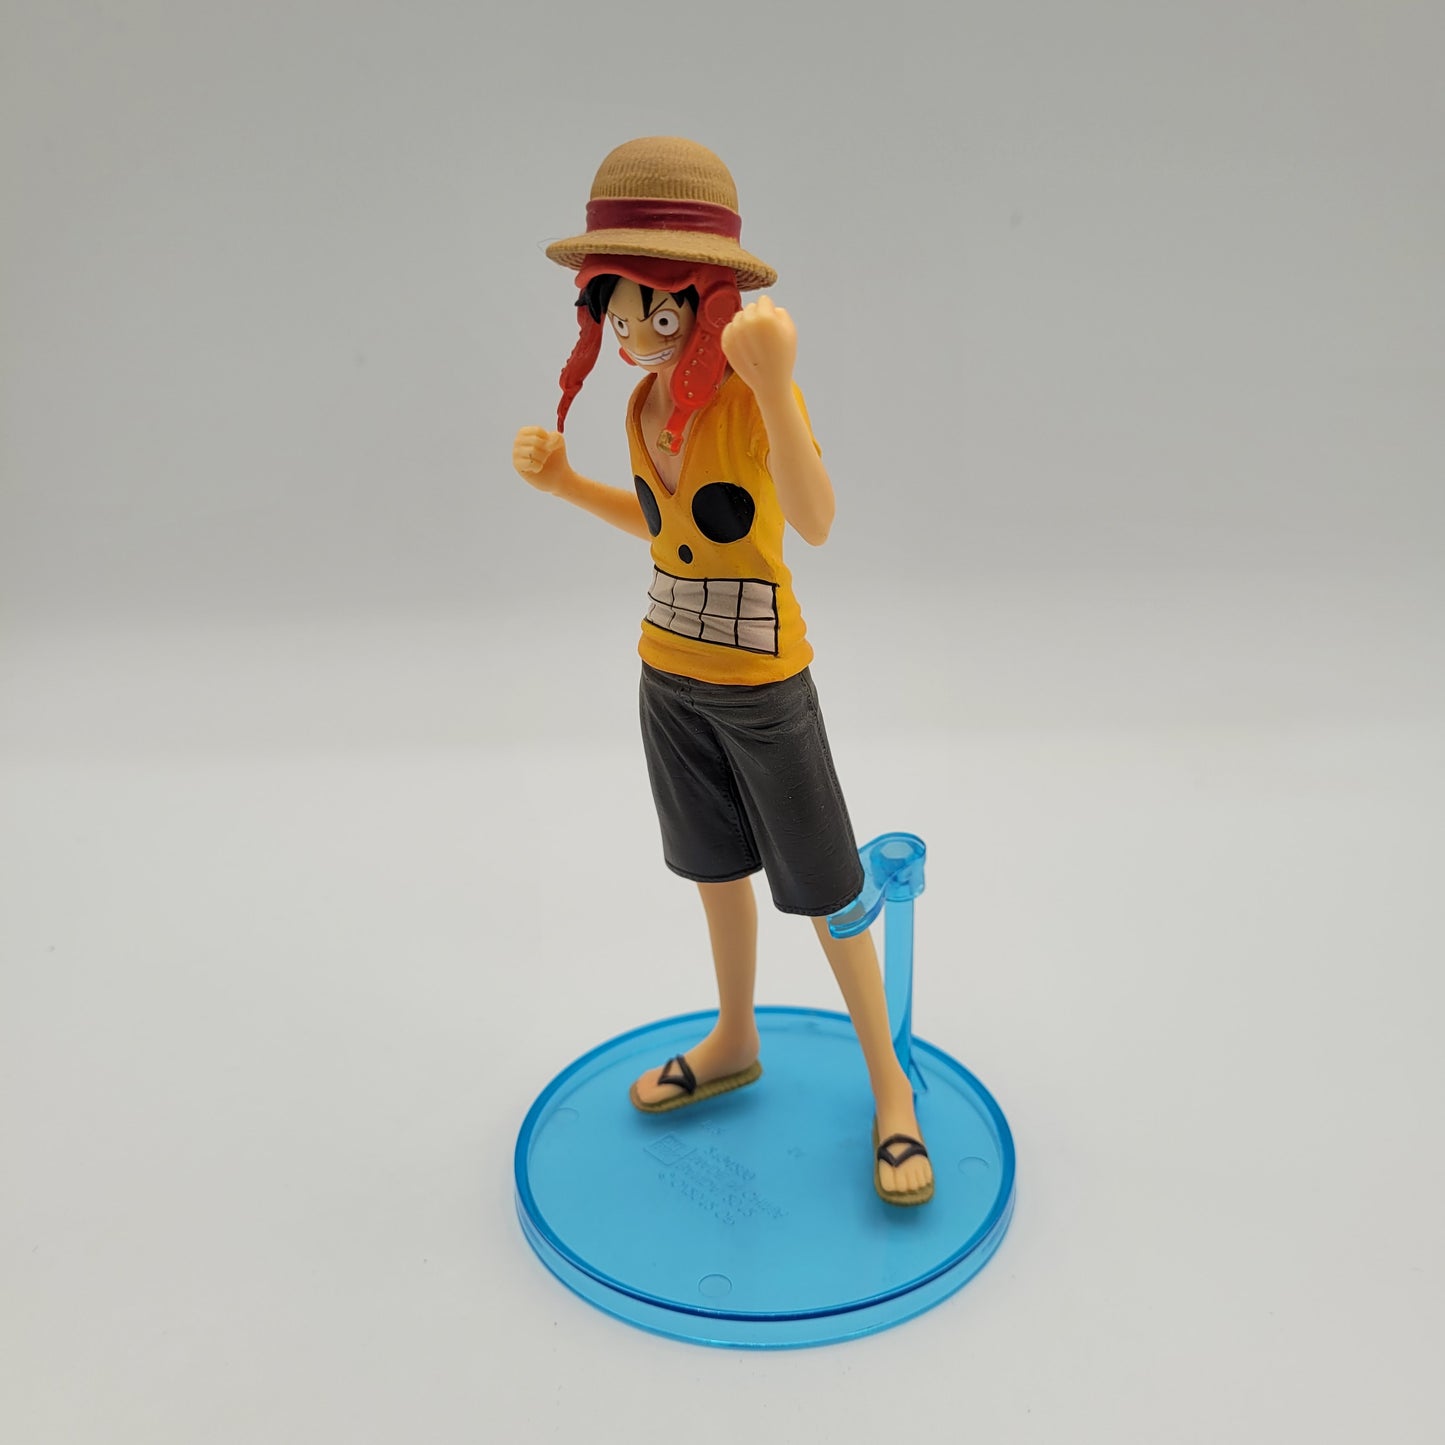 Occasion One Piece Monkey D. Luffy